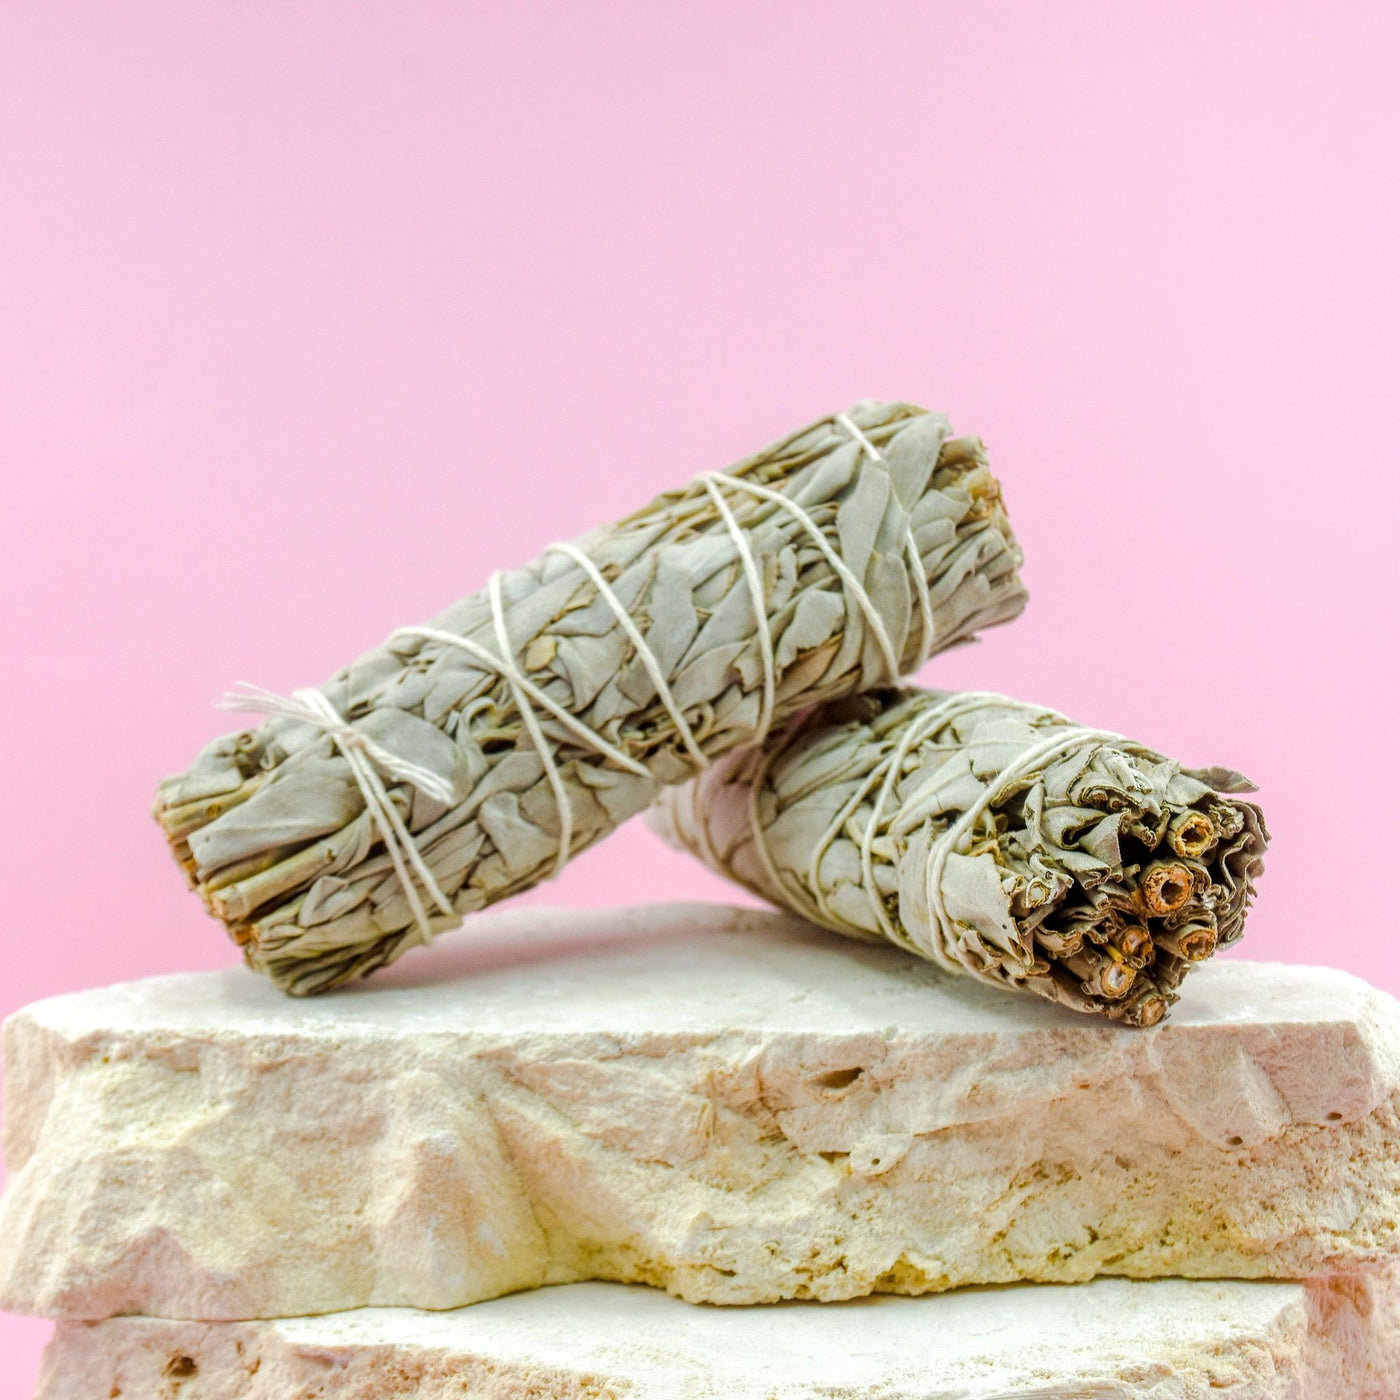 white sage smudge stick - Wands of Lust Co